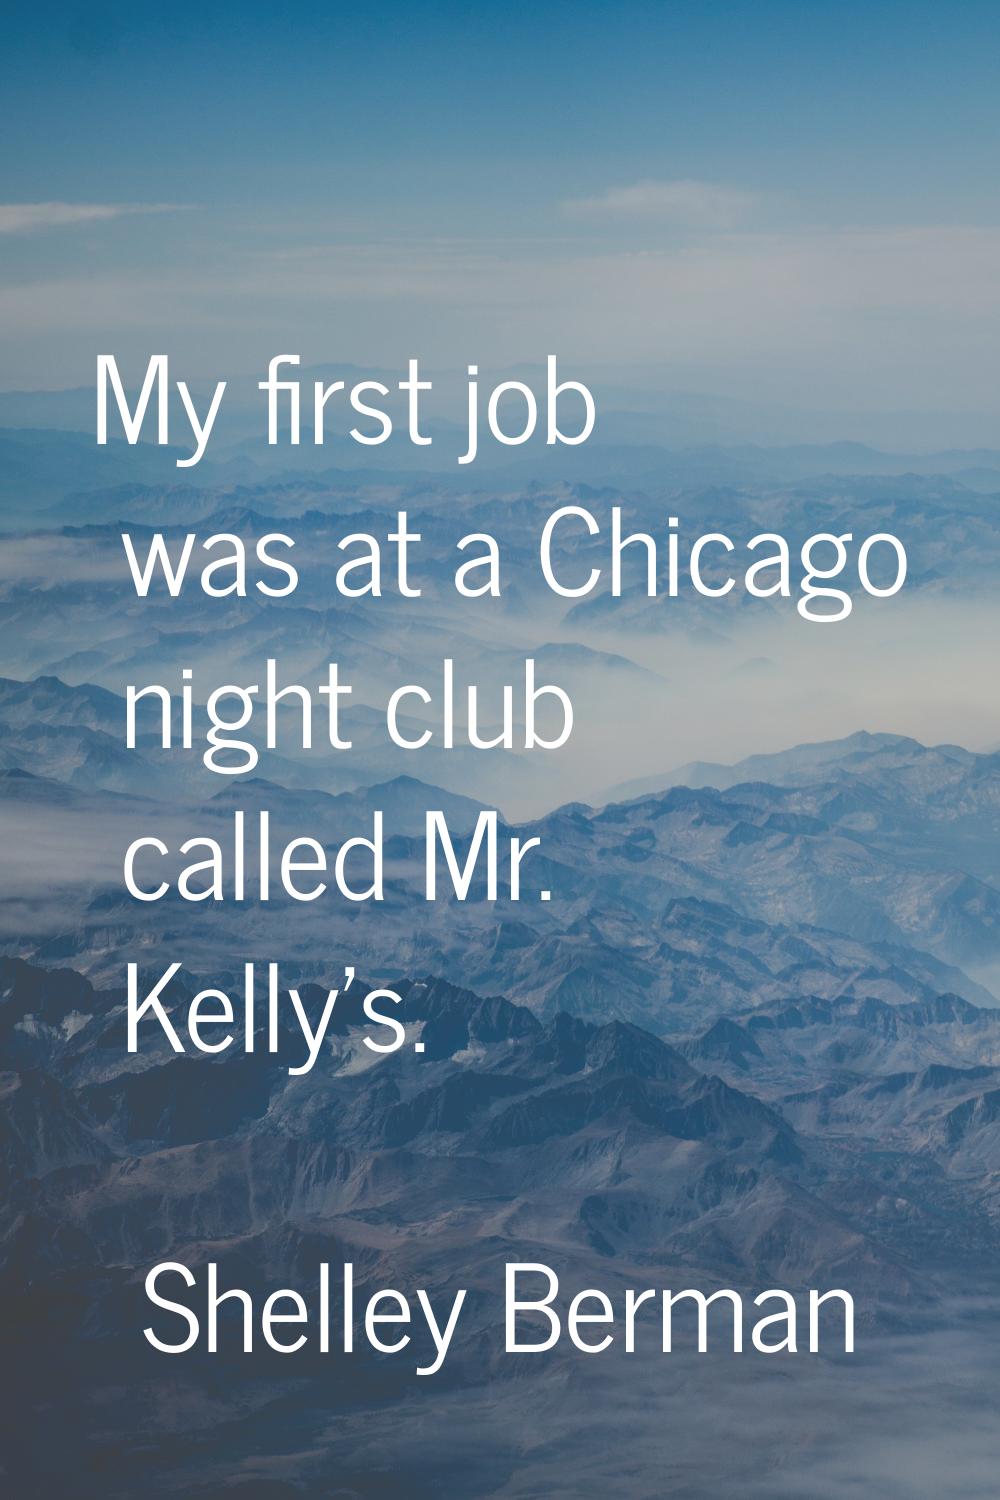 My first job was at a Chicago night club called Mr. Kelly's.